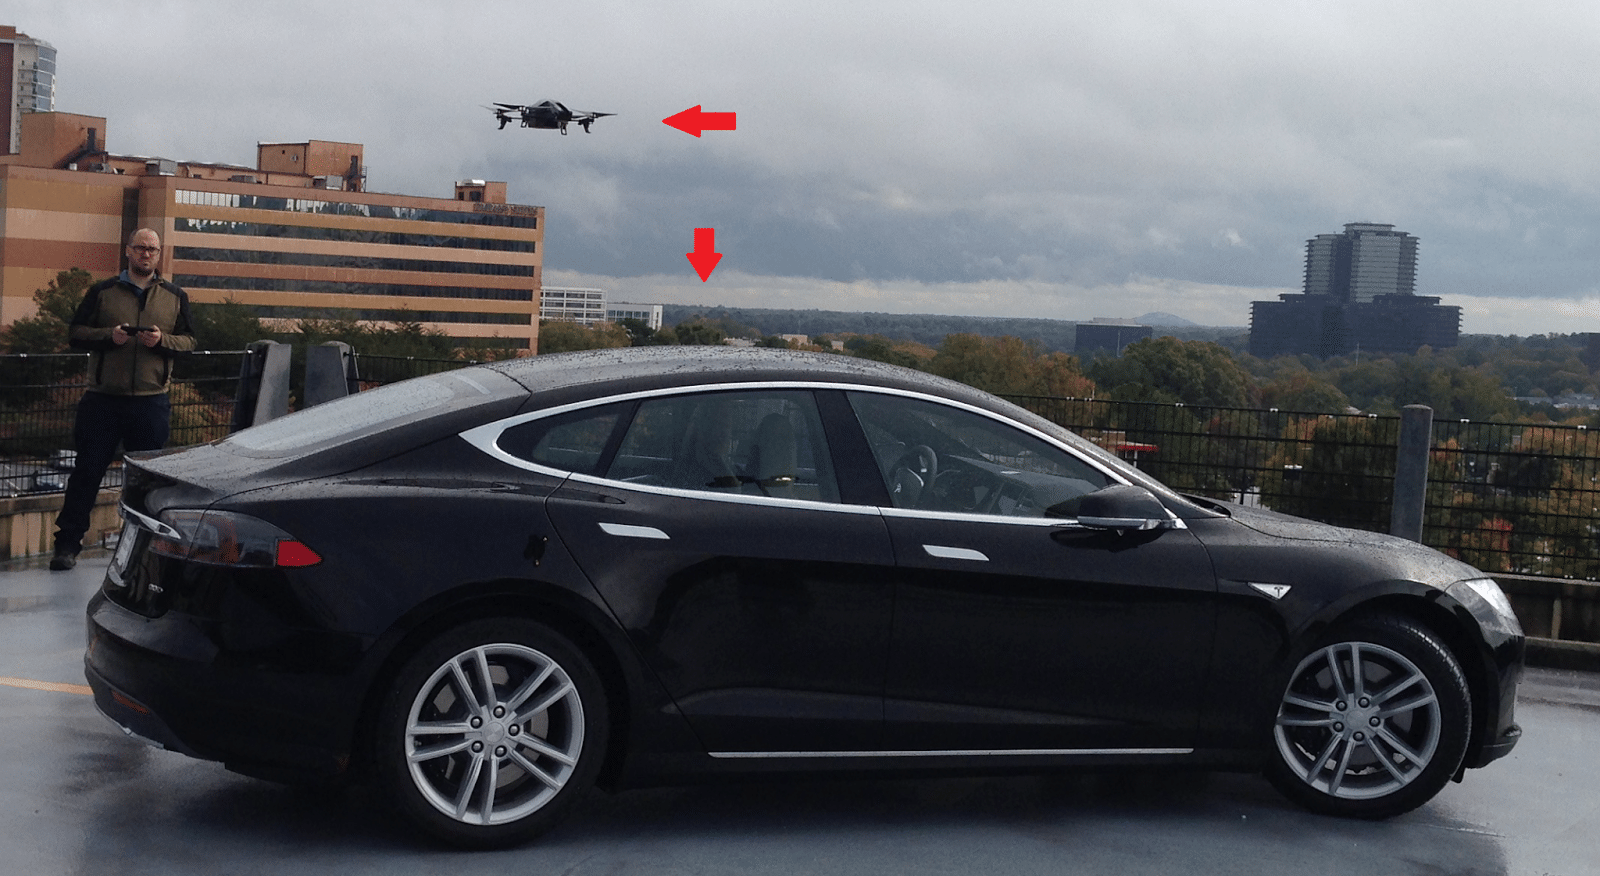 Security expert Rob Graham flies a Parrot AR Drone next to his Tesla Model S. Both devices use the same software to connect to and communicate over wireless networks. 